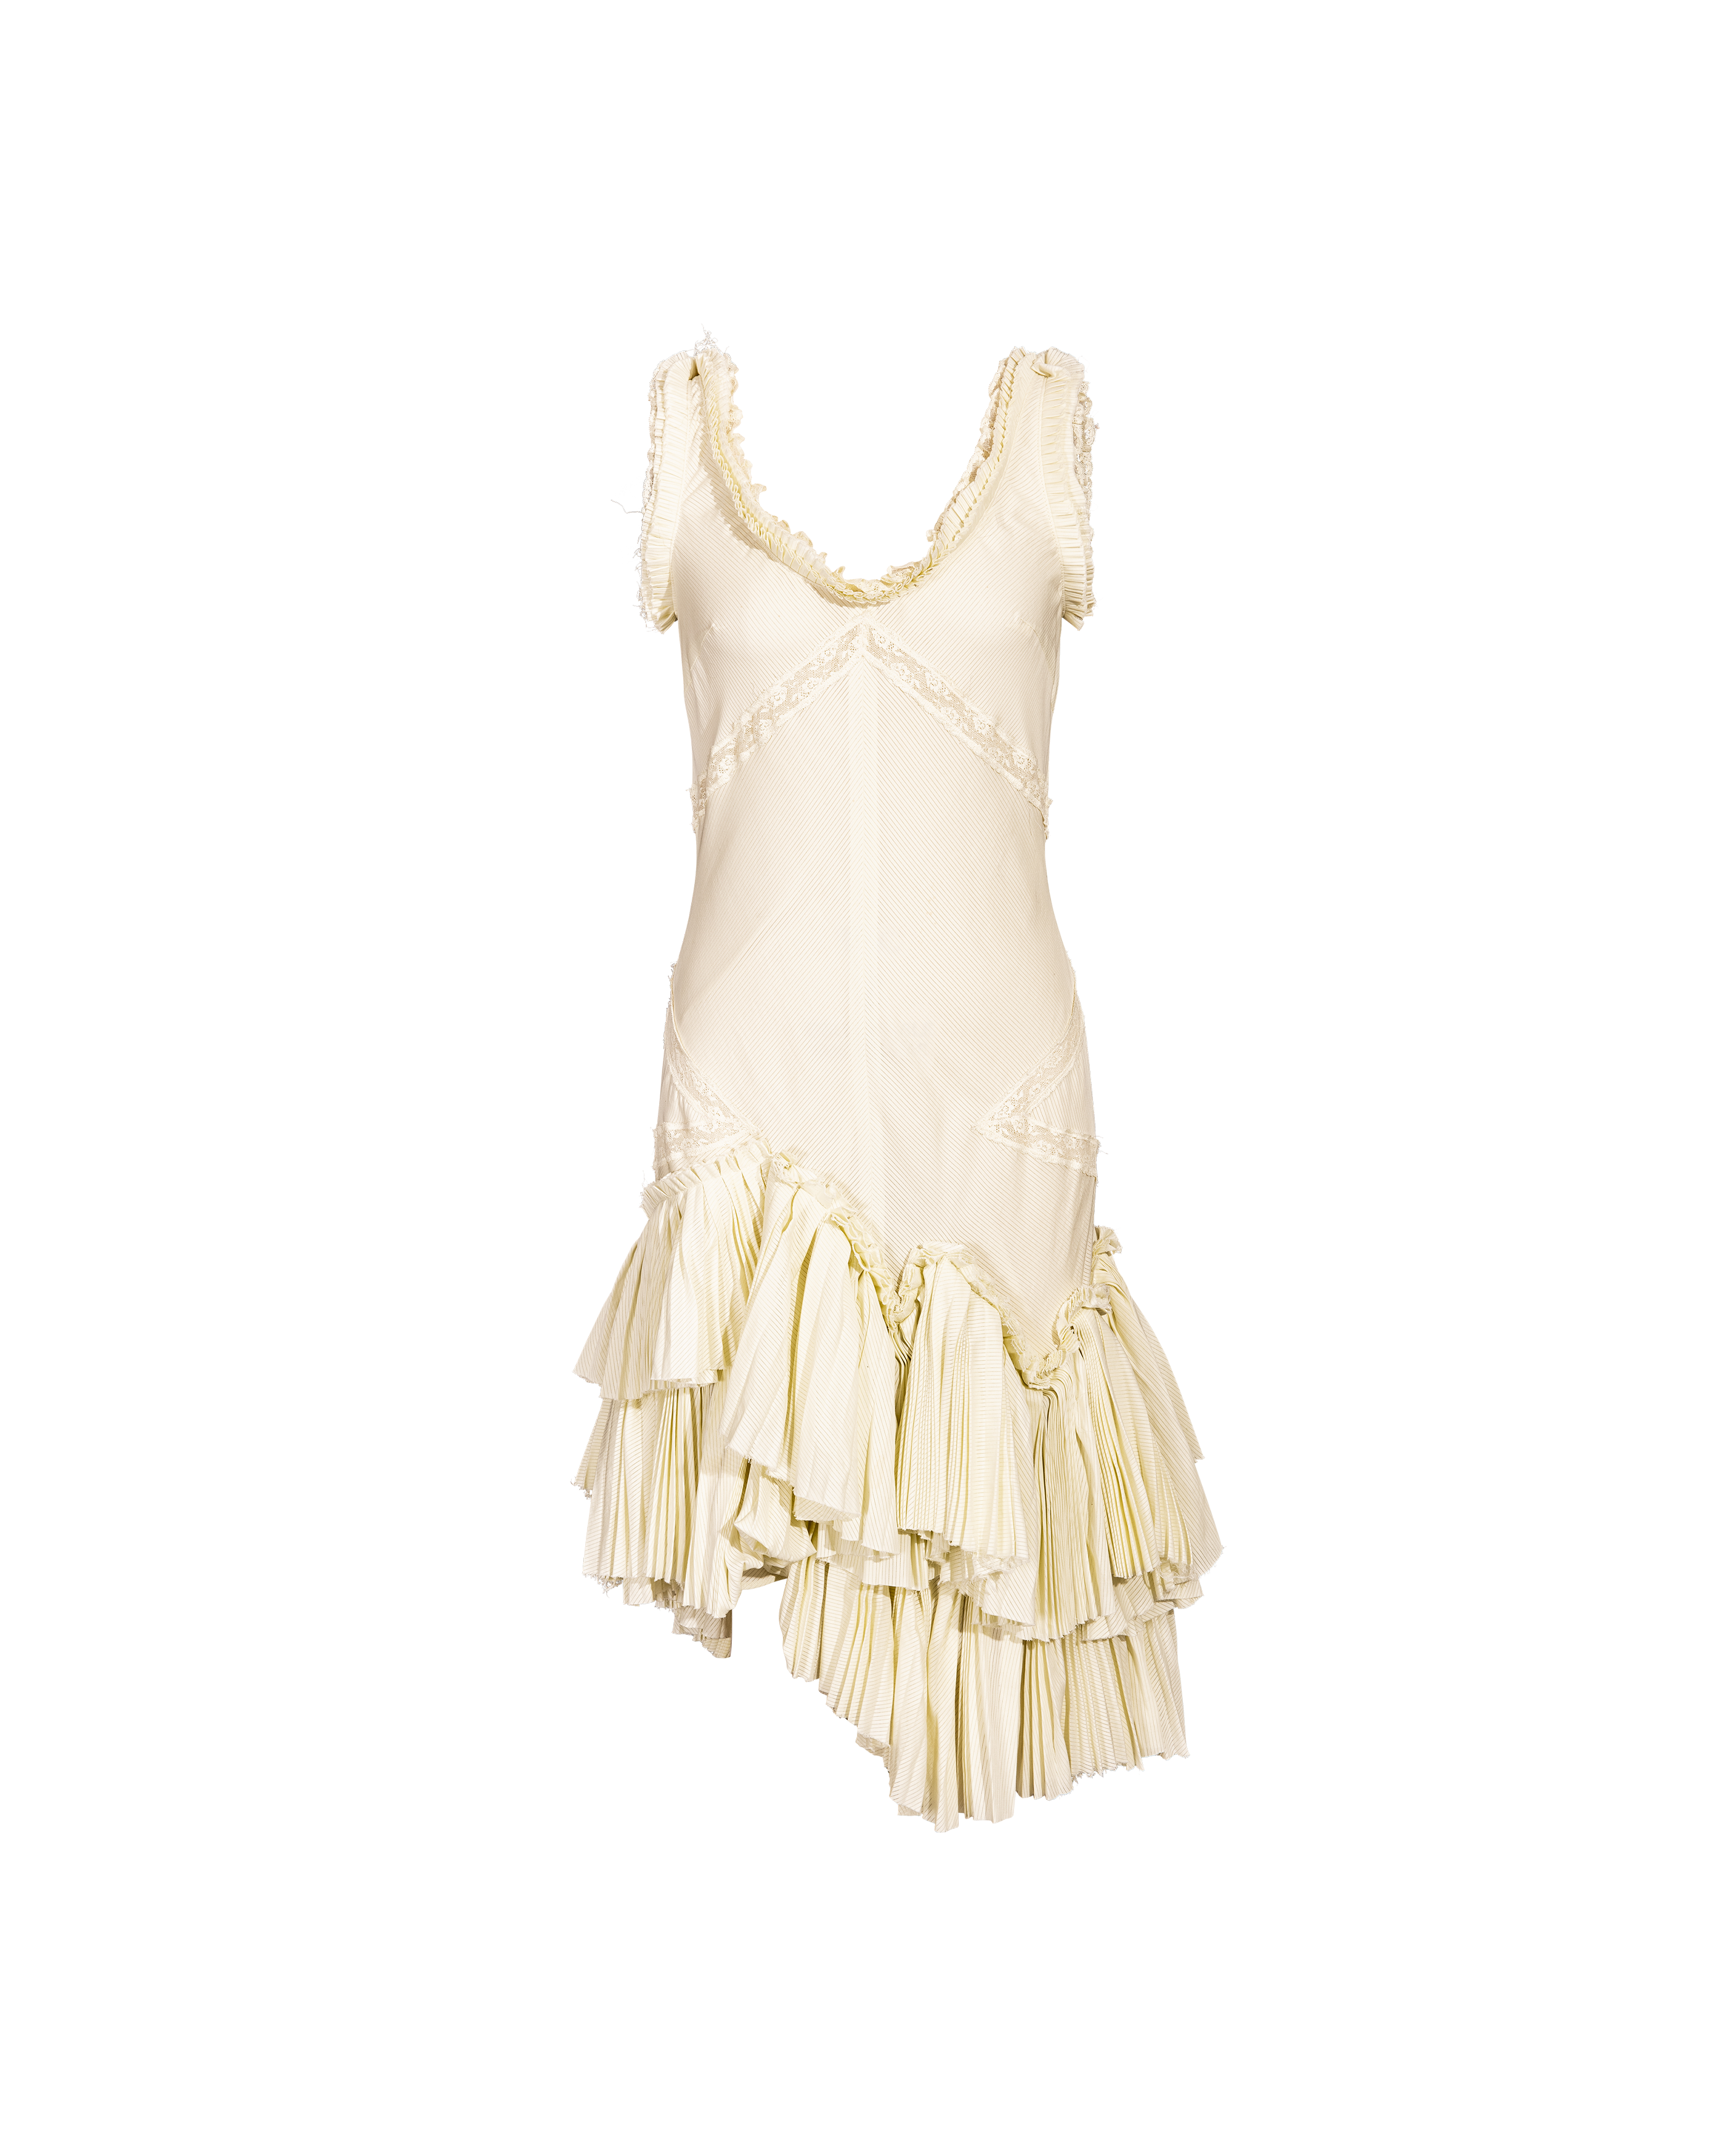 S/S 2005 Pale Yellow Pleated and Lace Cotton Dress